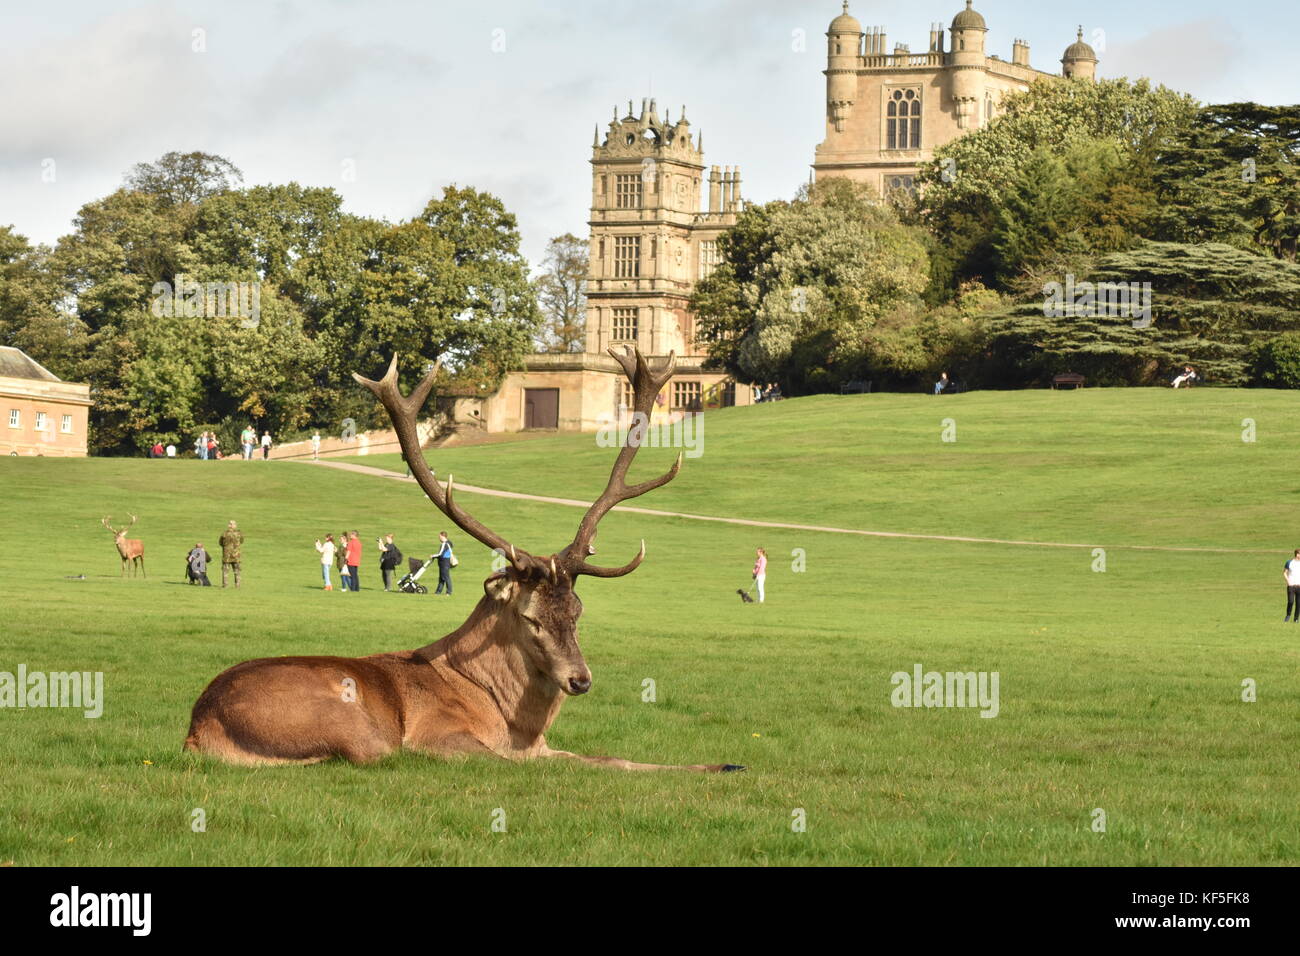 Wollaton hall Deer park, Stag in park Stock Photo